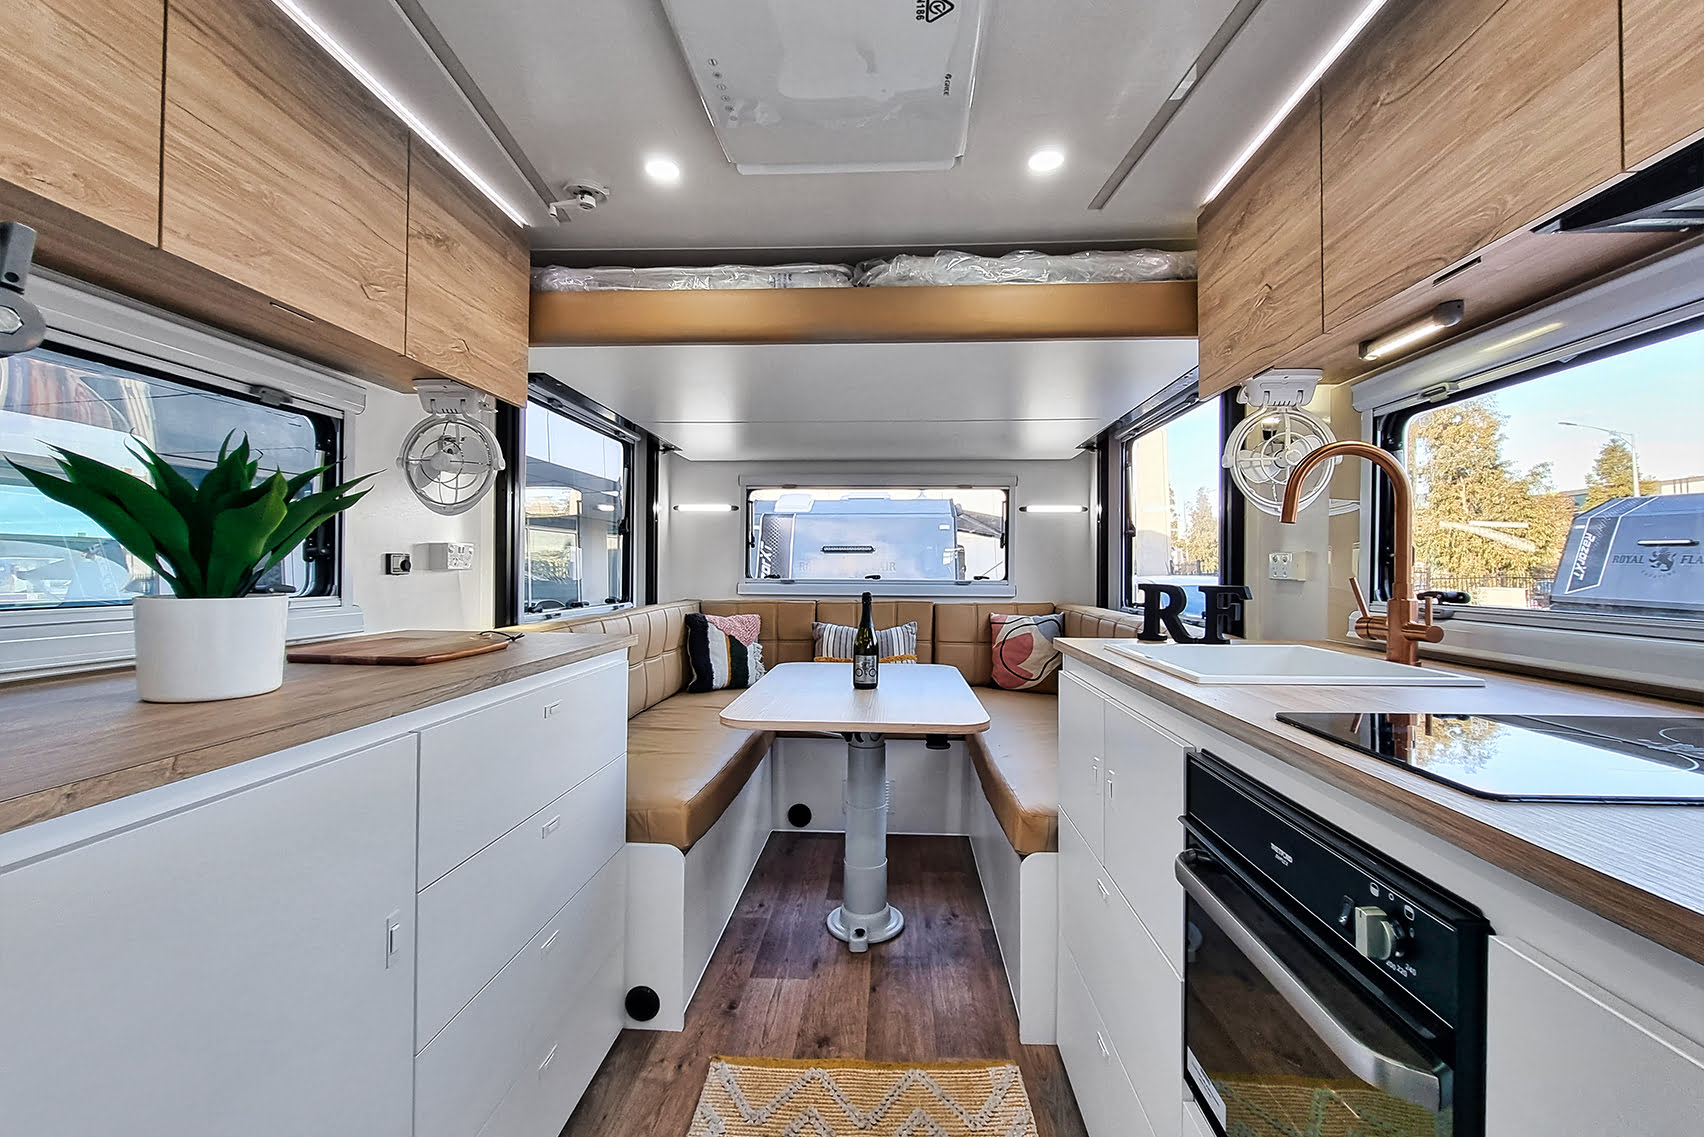 Regal Royal Flair Aussiemate caravan showcasing a homely kitchen, radiant light from windows, and organized storage facilities